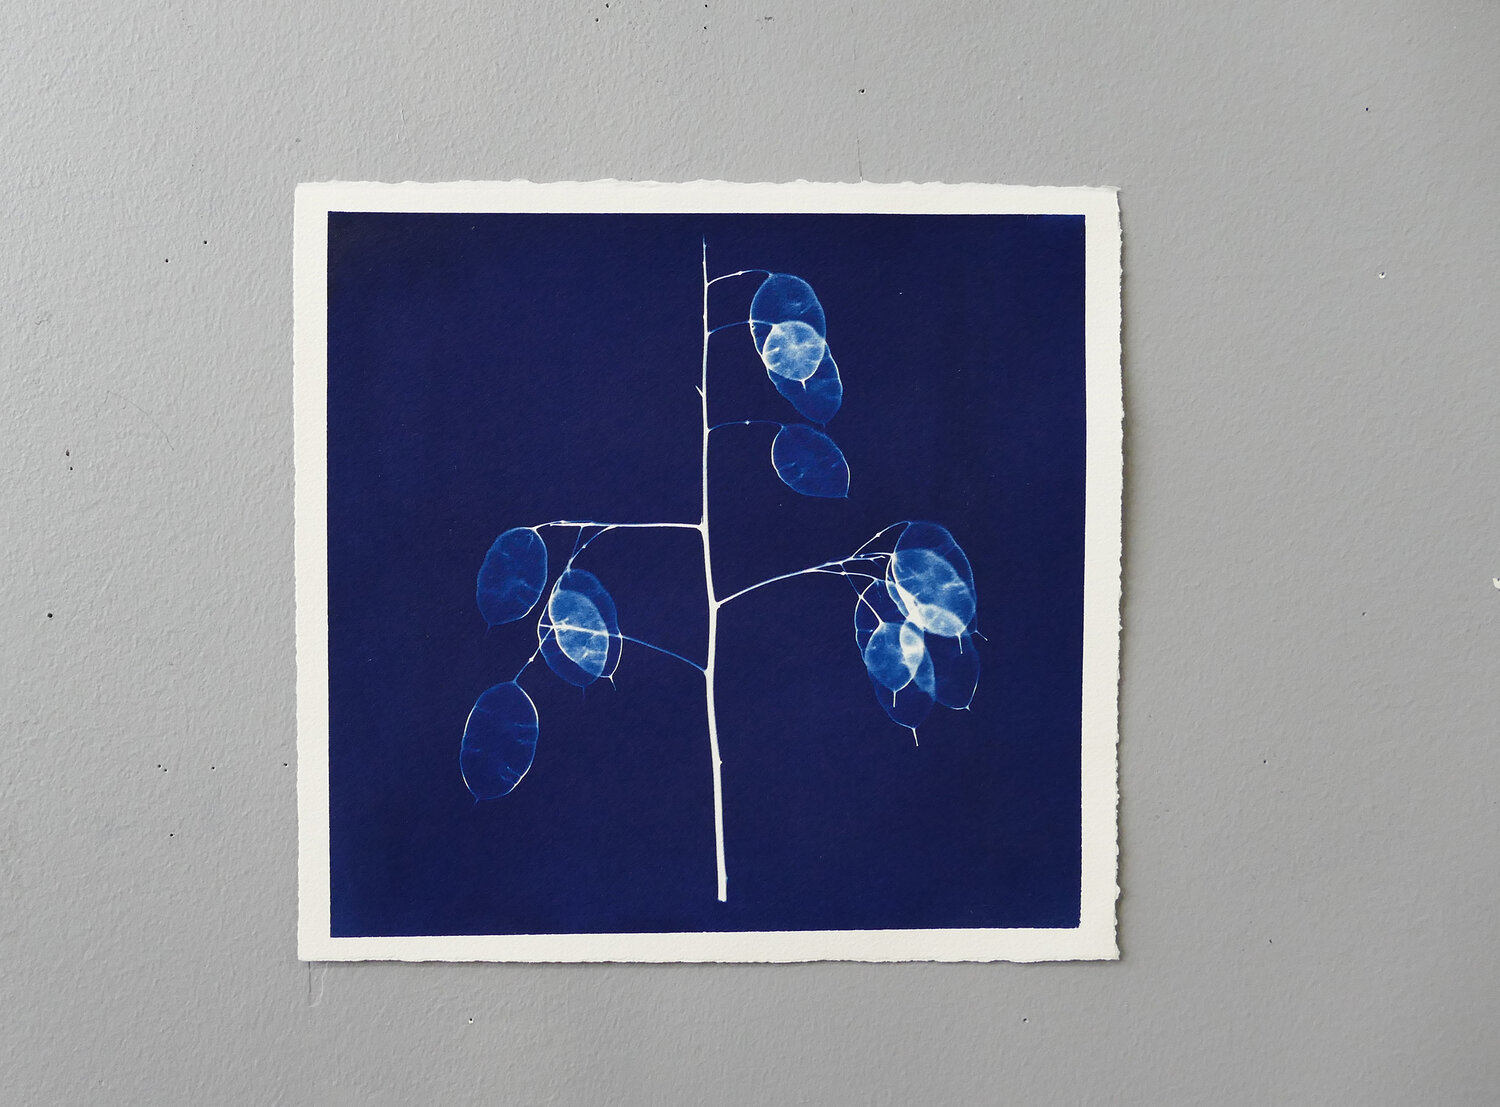 Creating 100 Sheets of Cyanotype Paper